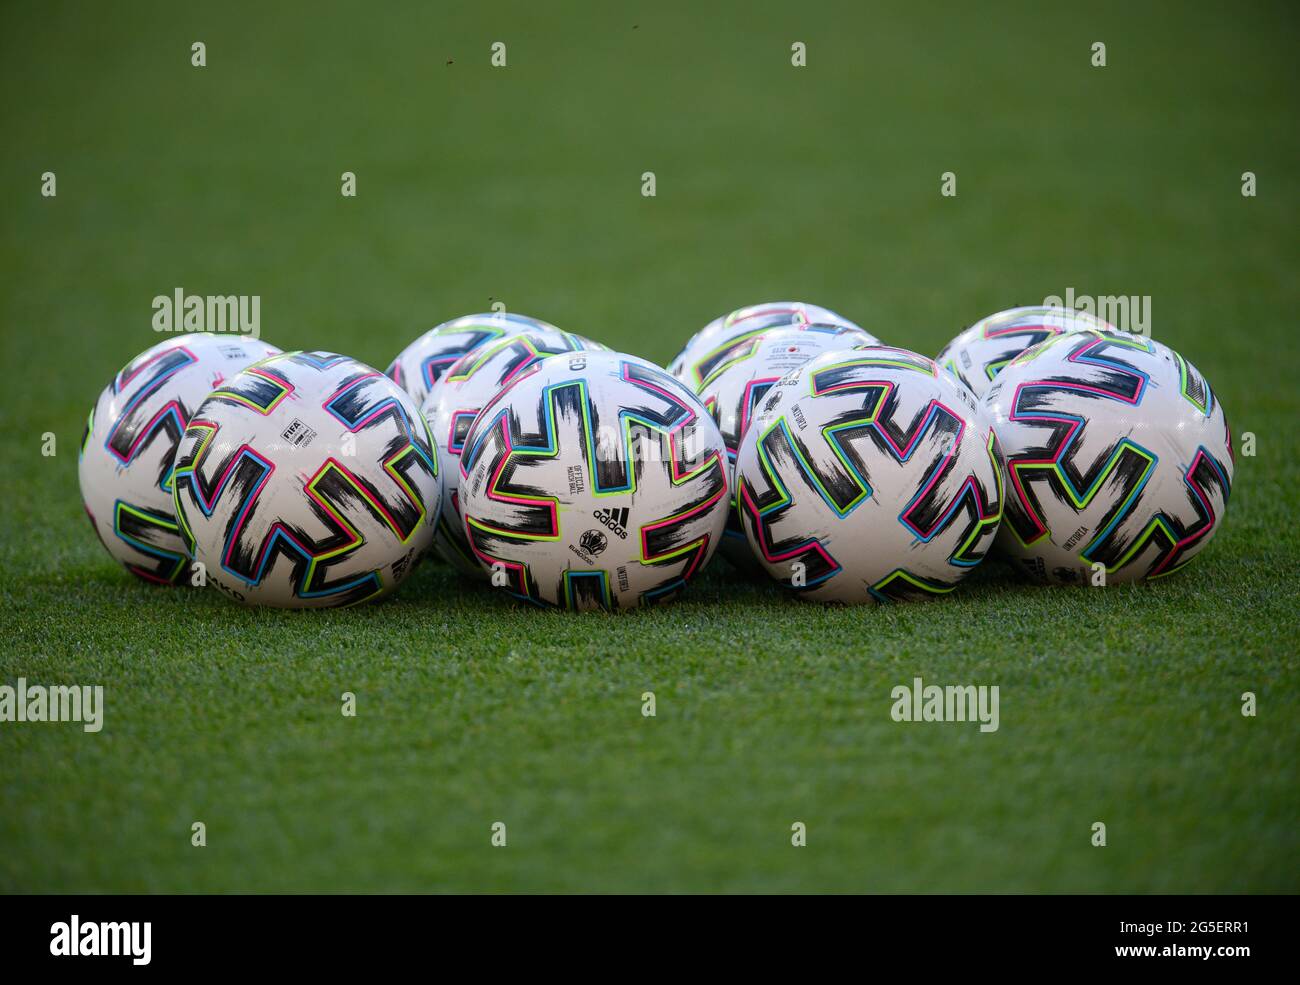 Budapest, Hungary. 26th June, 2021. Football: European Championship, Round  of 16, before the match Netherlands - Czech Republic, final training  Netherlands, in the Puskas Arena. Balls are lying on the grass. Credit: